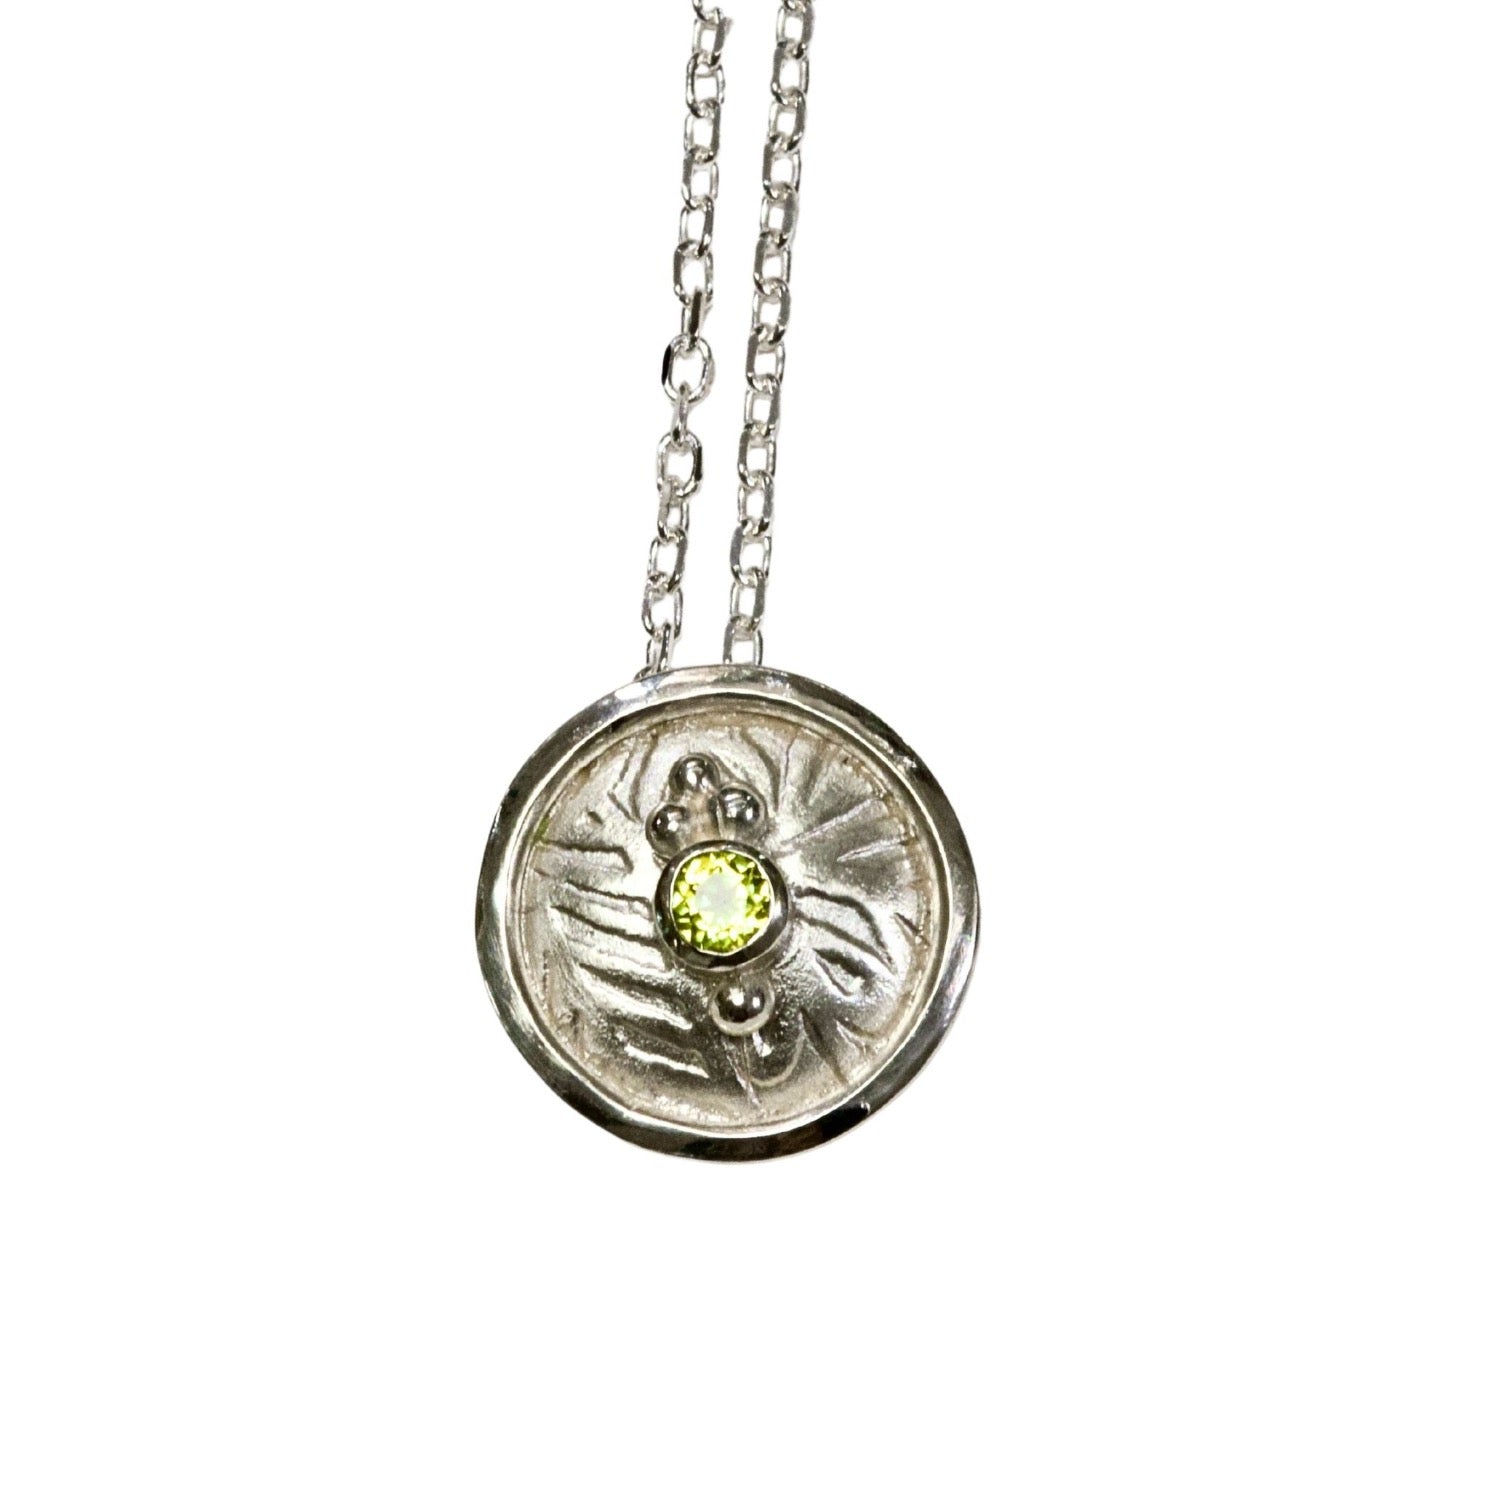 Boudicca Silver Shield Necklace with peridot